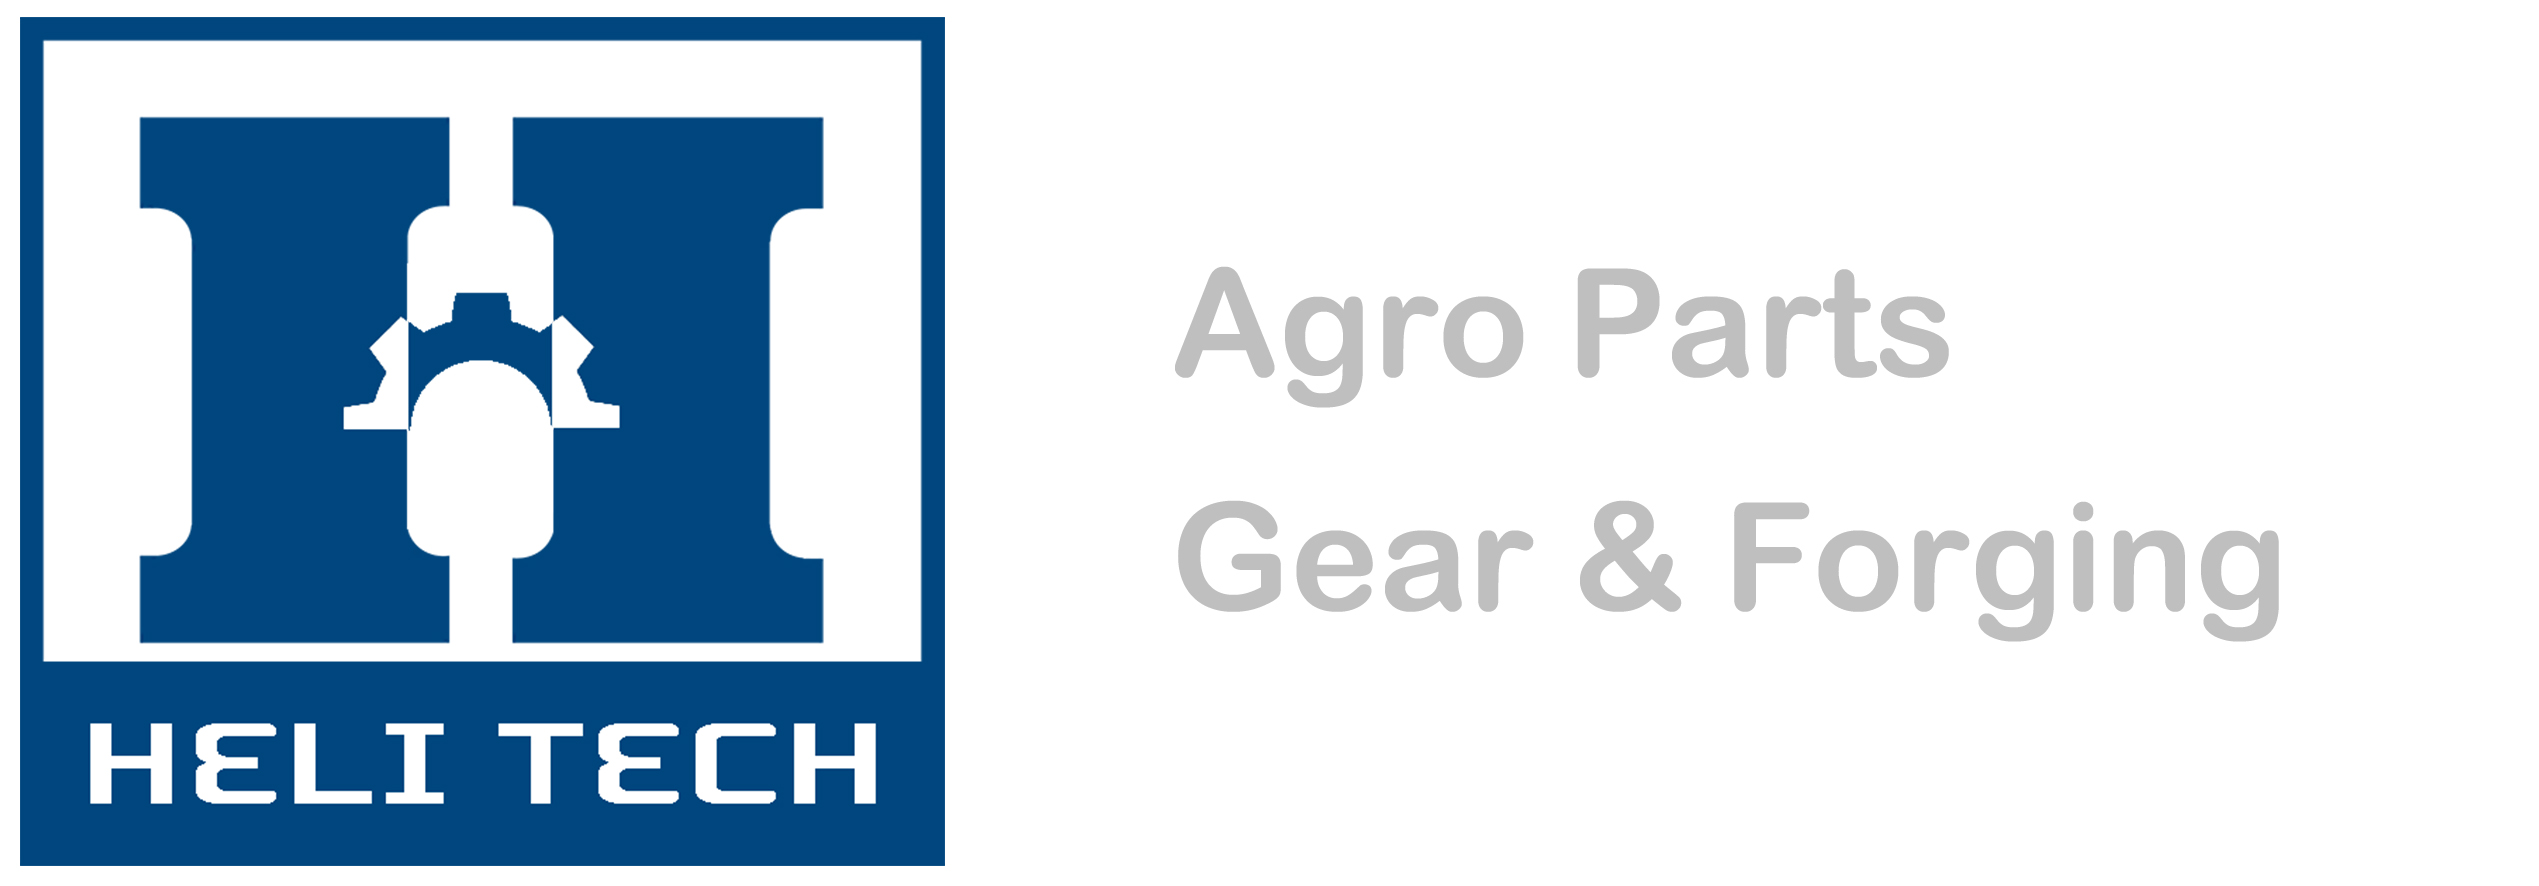 Agro Parts Gear & Forging